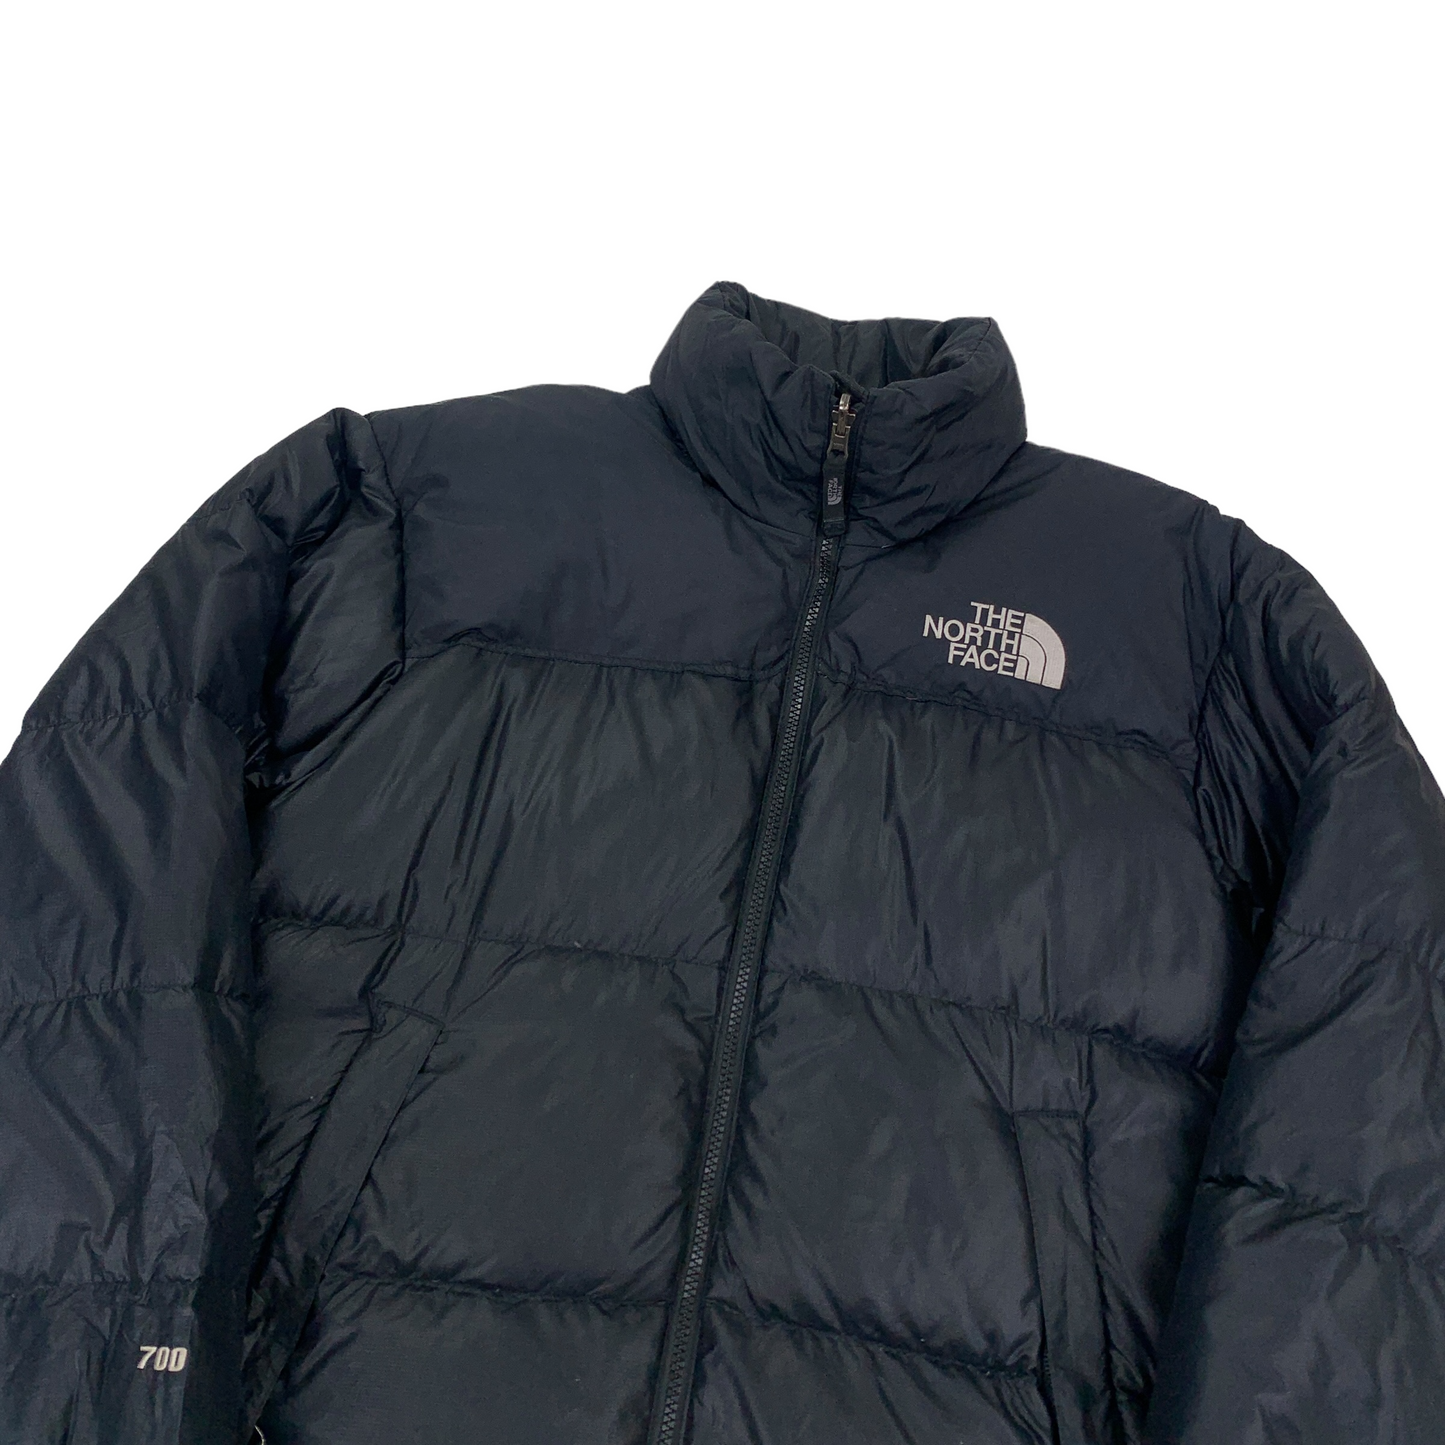 The North Face 700 Puffer Nuptse 1996 Jacket-pufferseason-1996-winter-secondhand-austria-vintage-sustainable-pre-owned-deal-sale-nuptse-puffer-down-coat